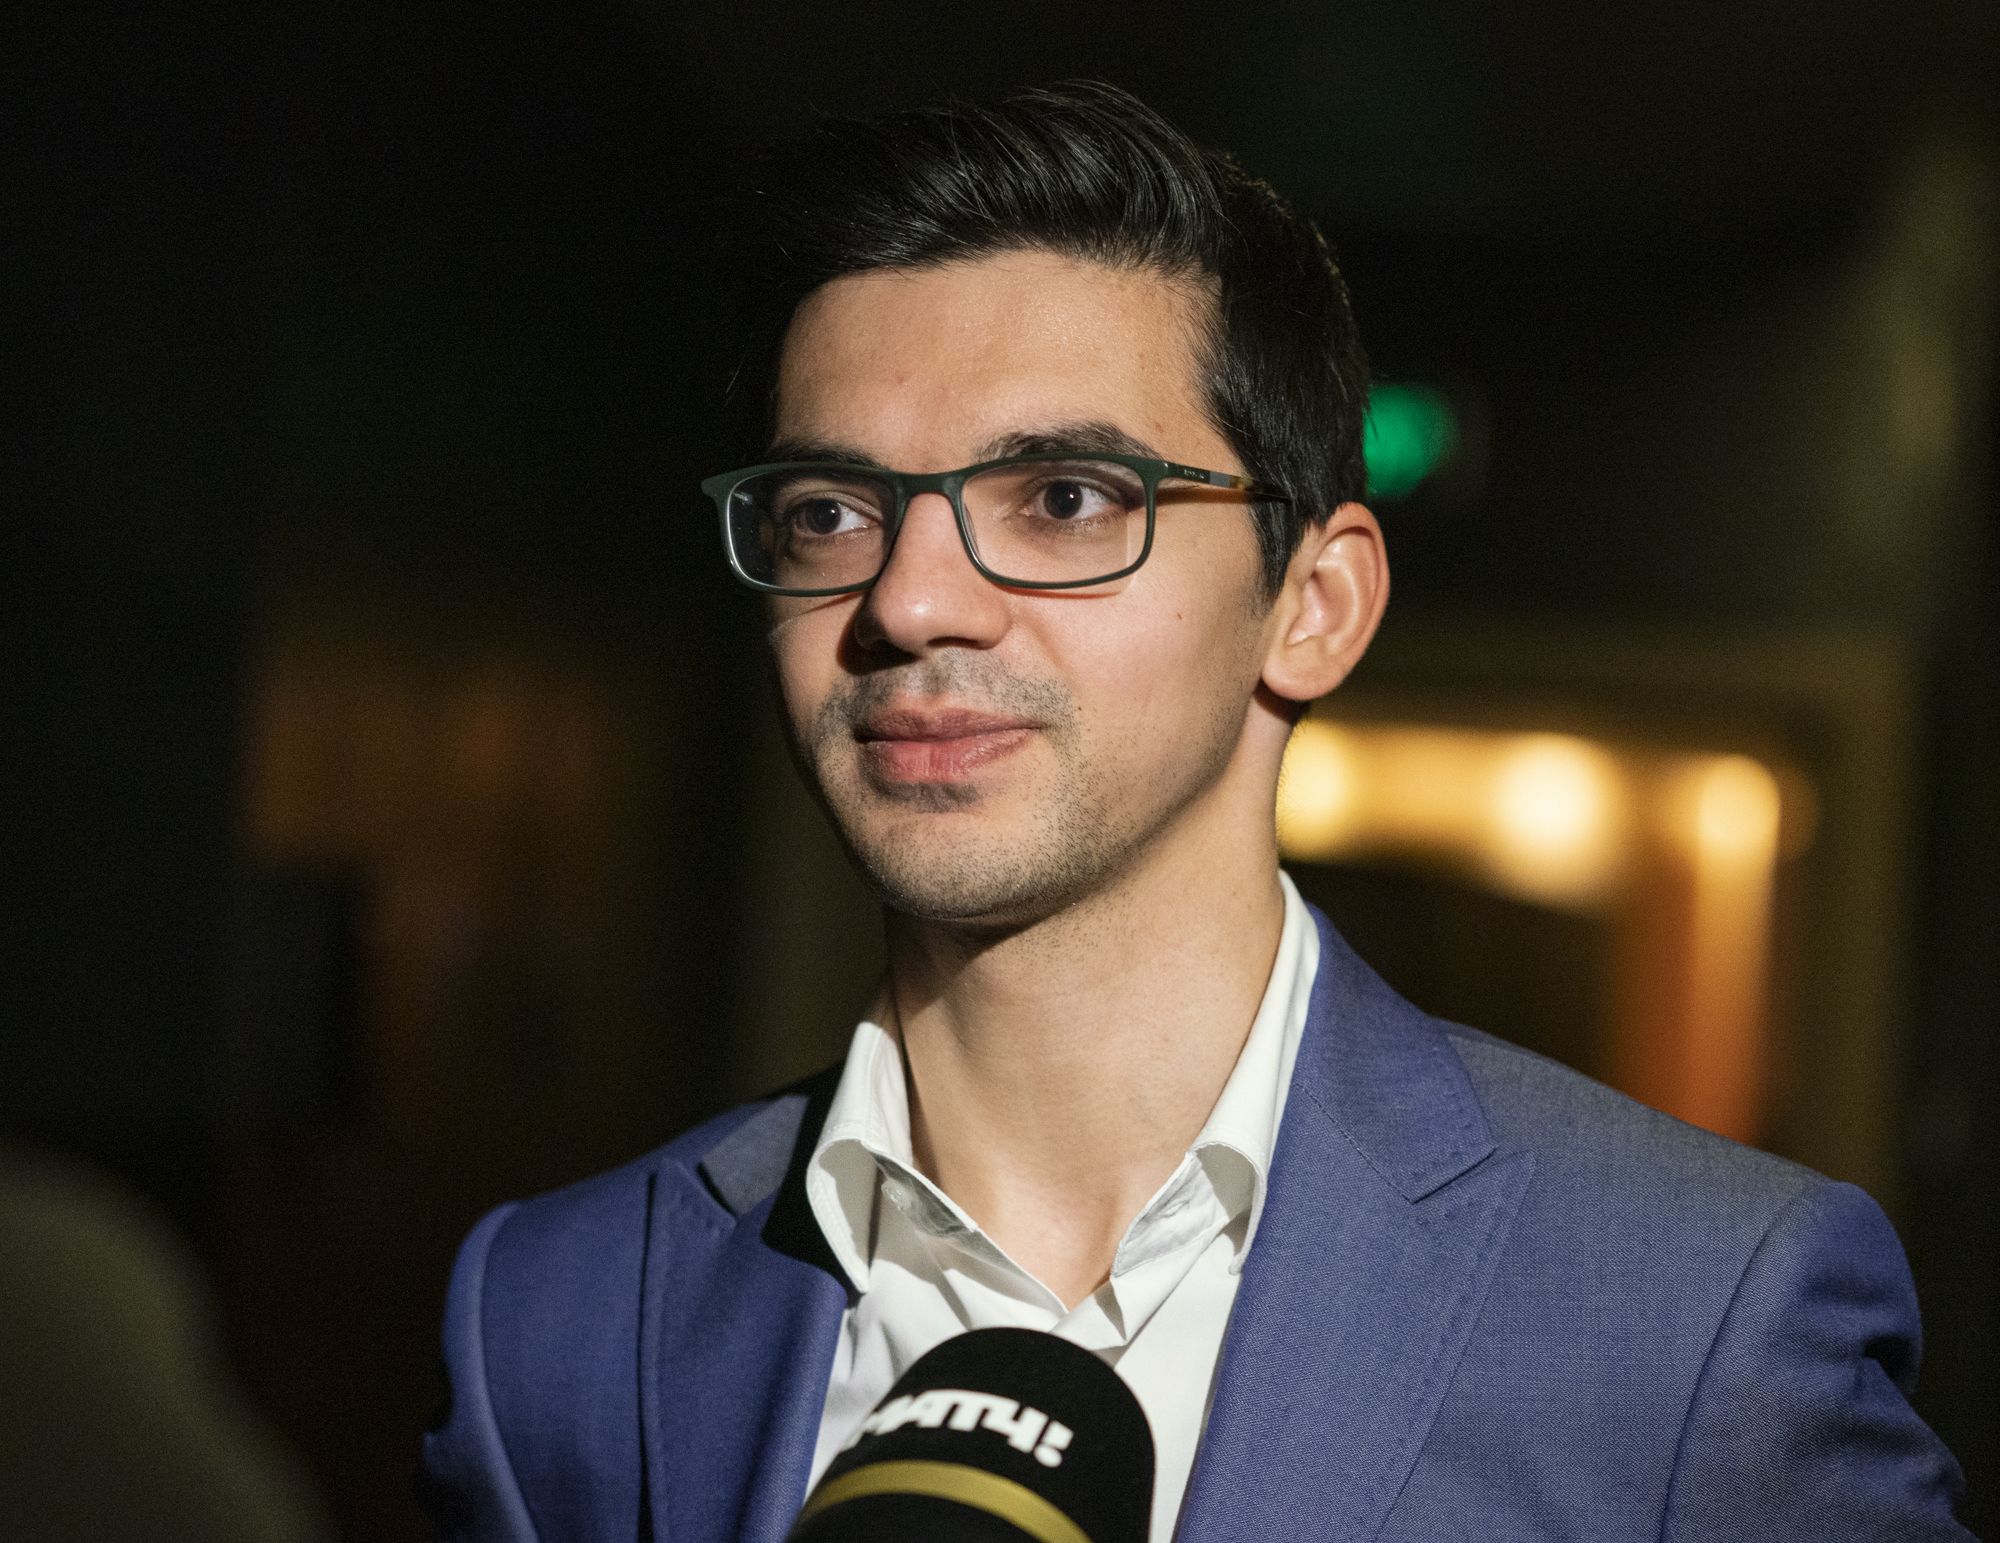 Anish Giri on X: The bots @chesscom now finally have a soul. / X